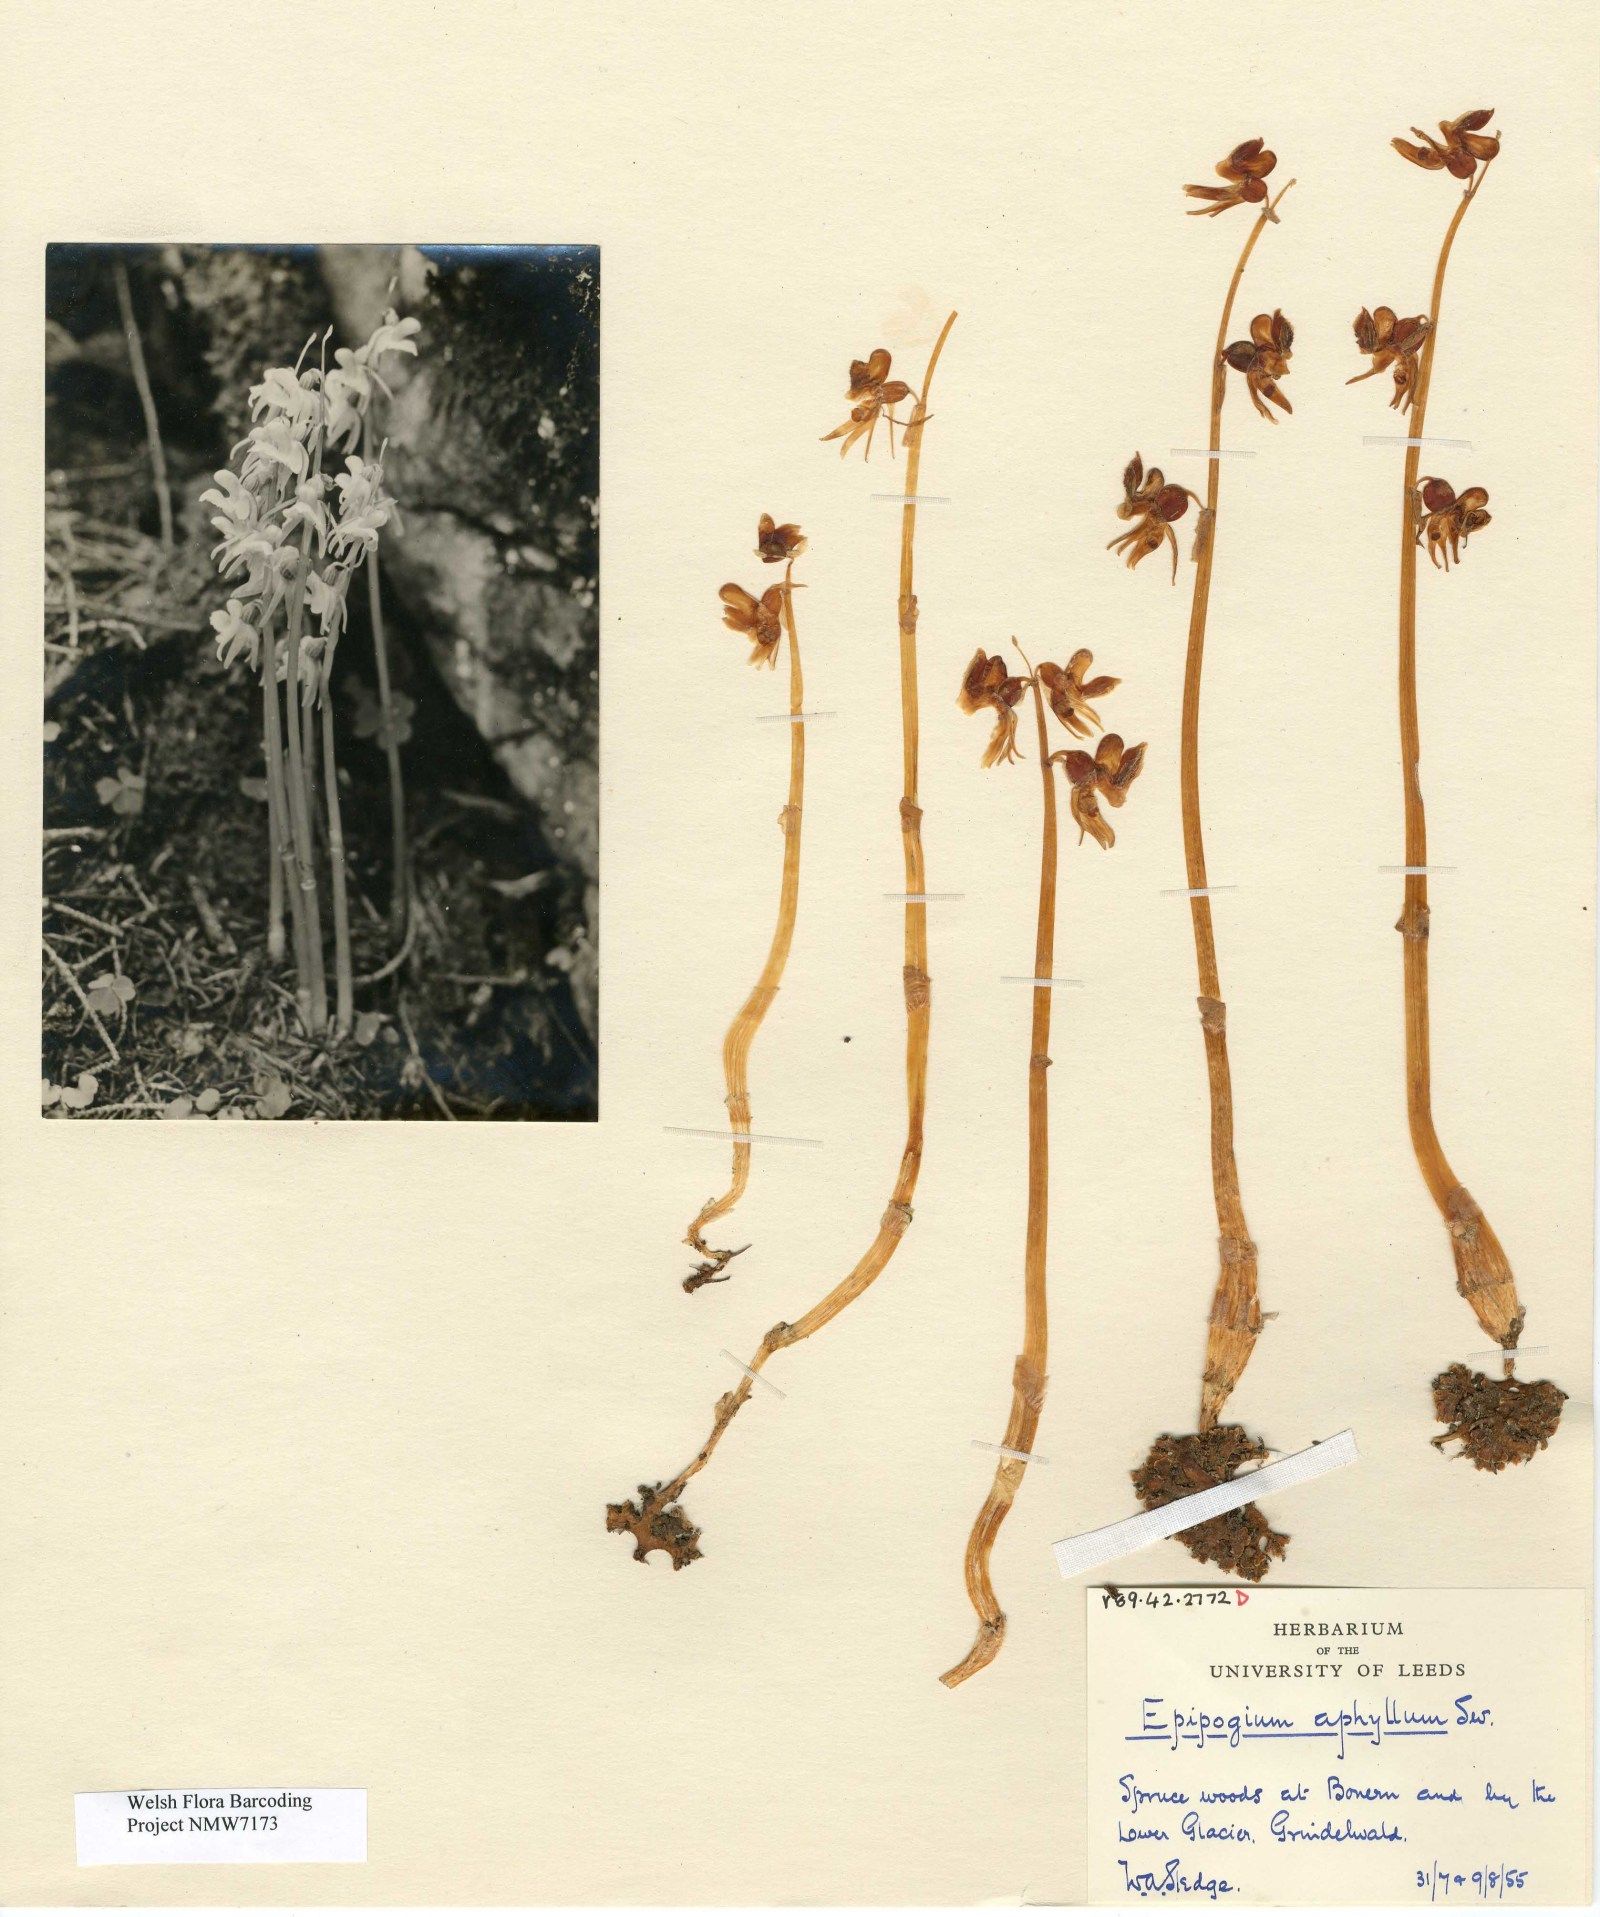 Swiss Ghost Orchids collected by W. A. Sledge in 1955.